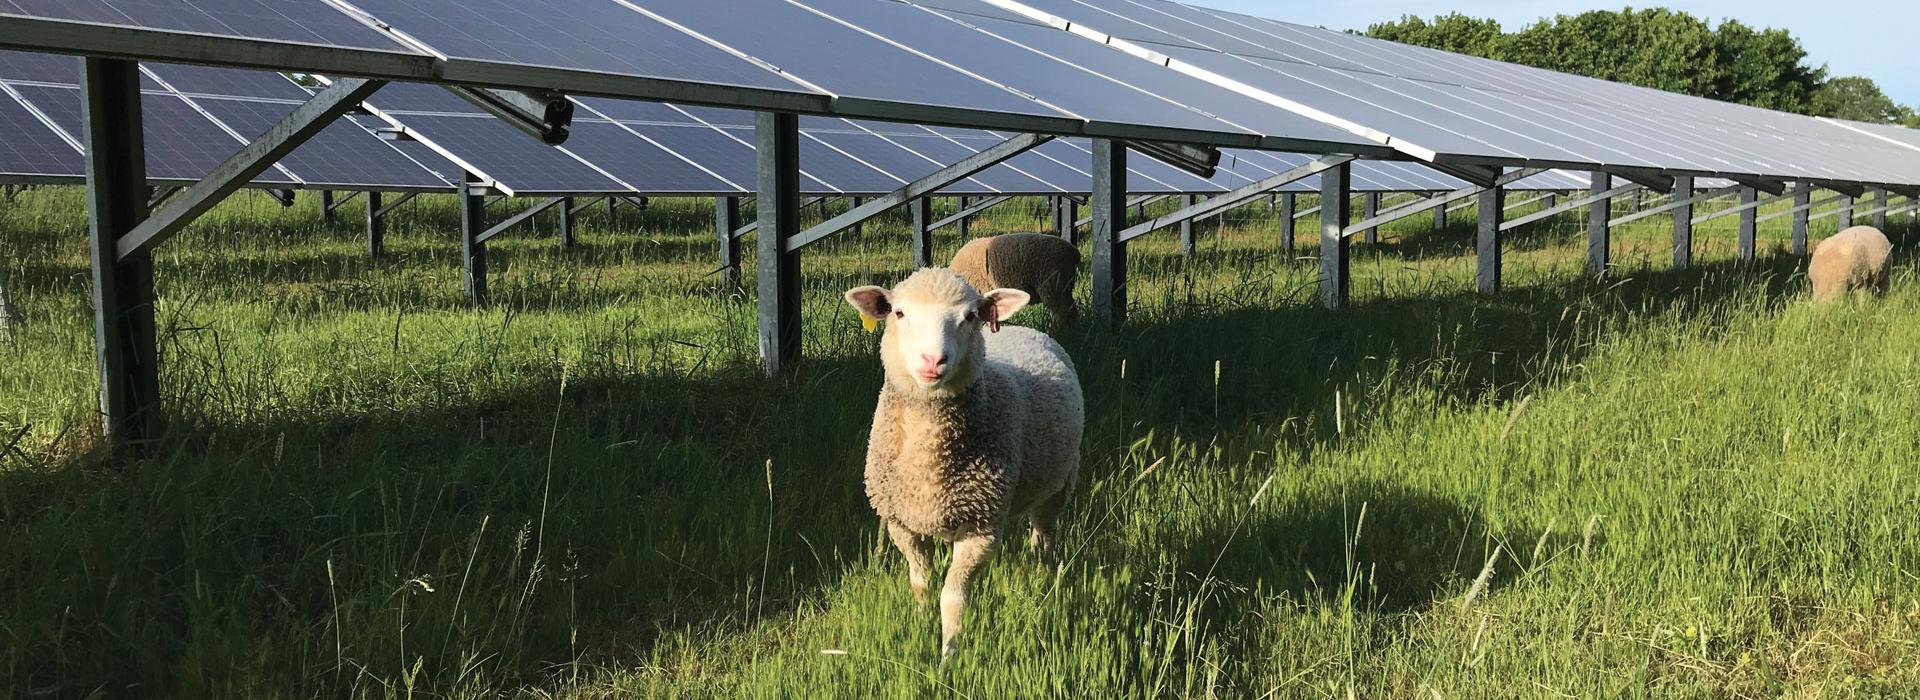 Sheep in front of solar panels.